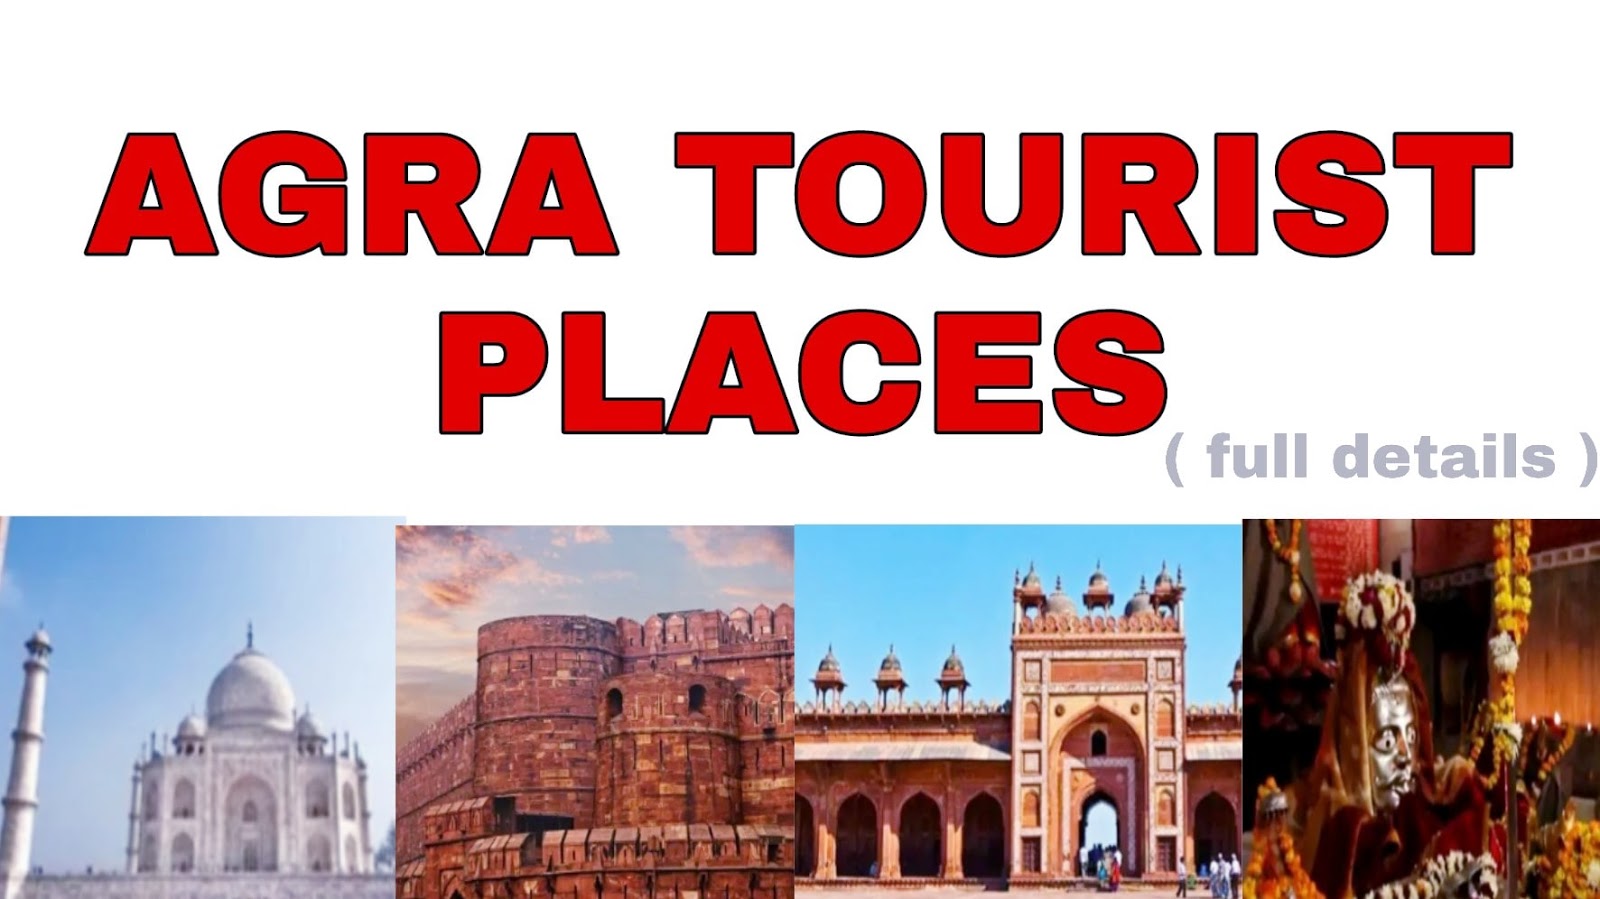 agra tourist places list in hindi